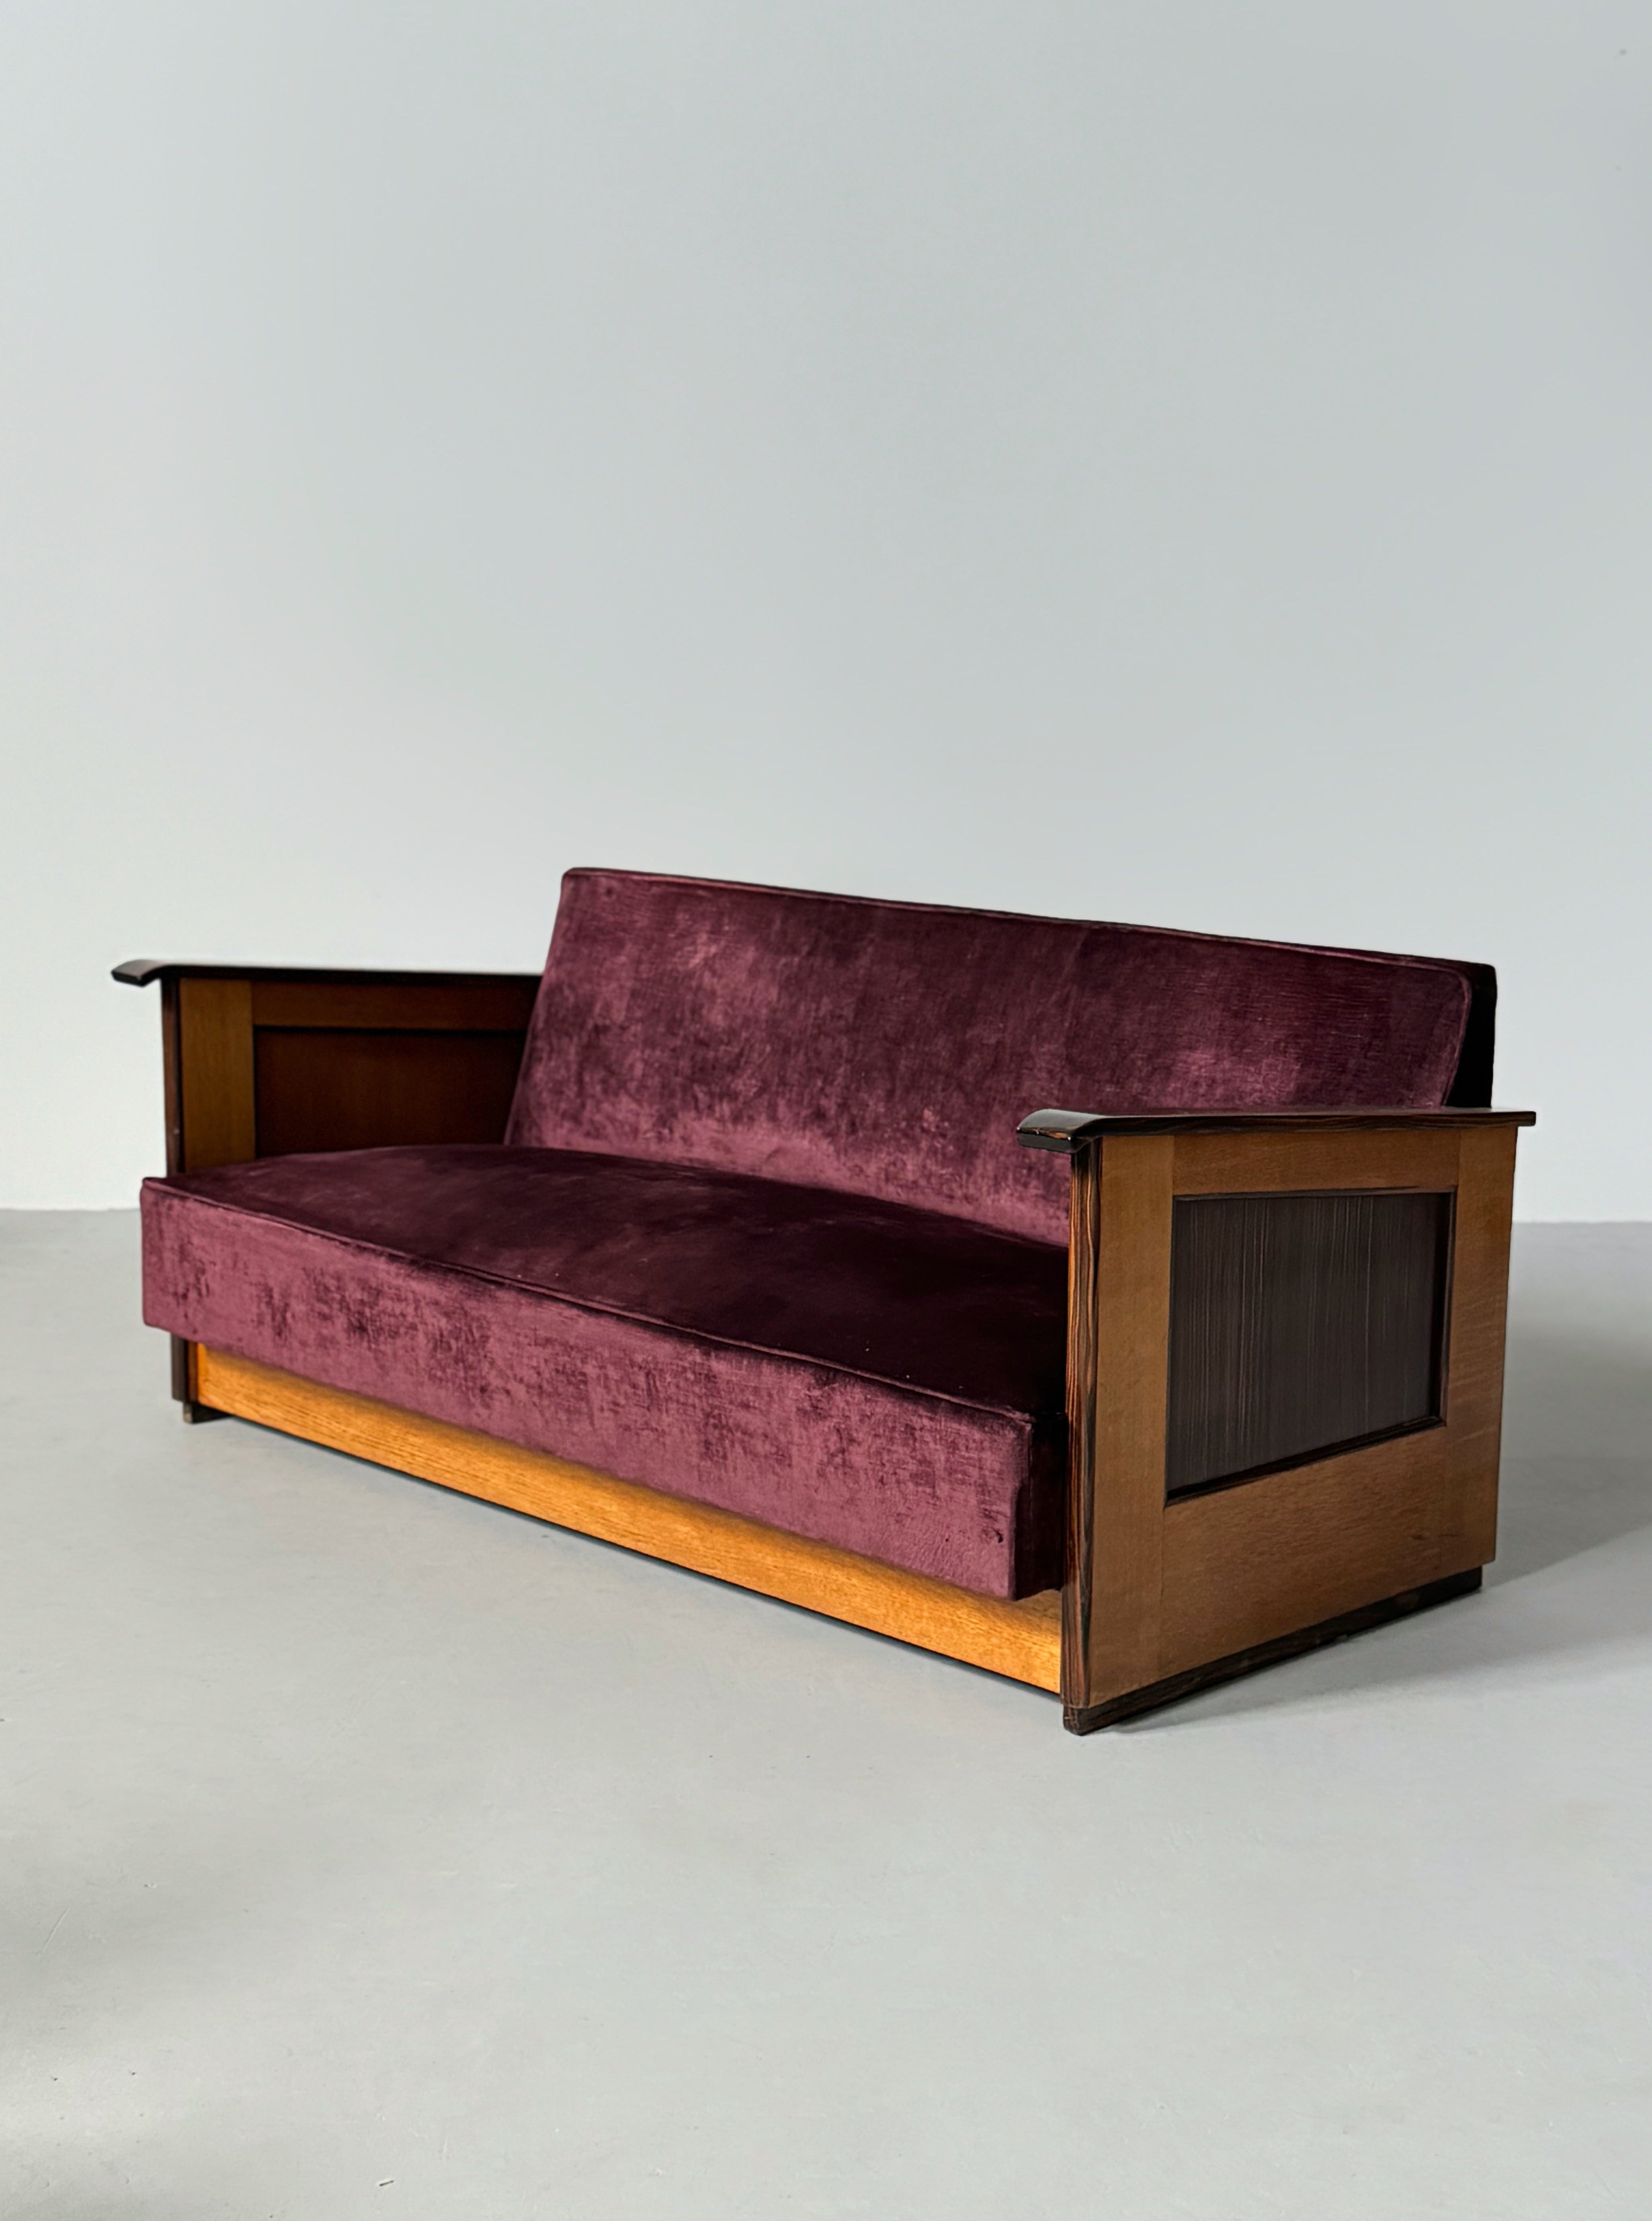 Haagse School sofa produced by H. Pander & Zn